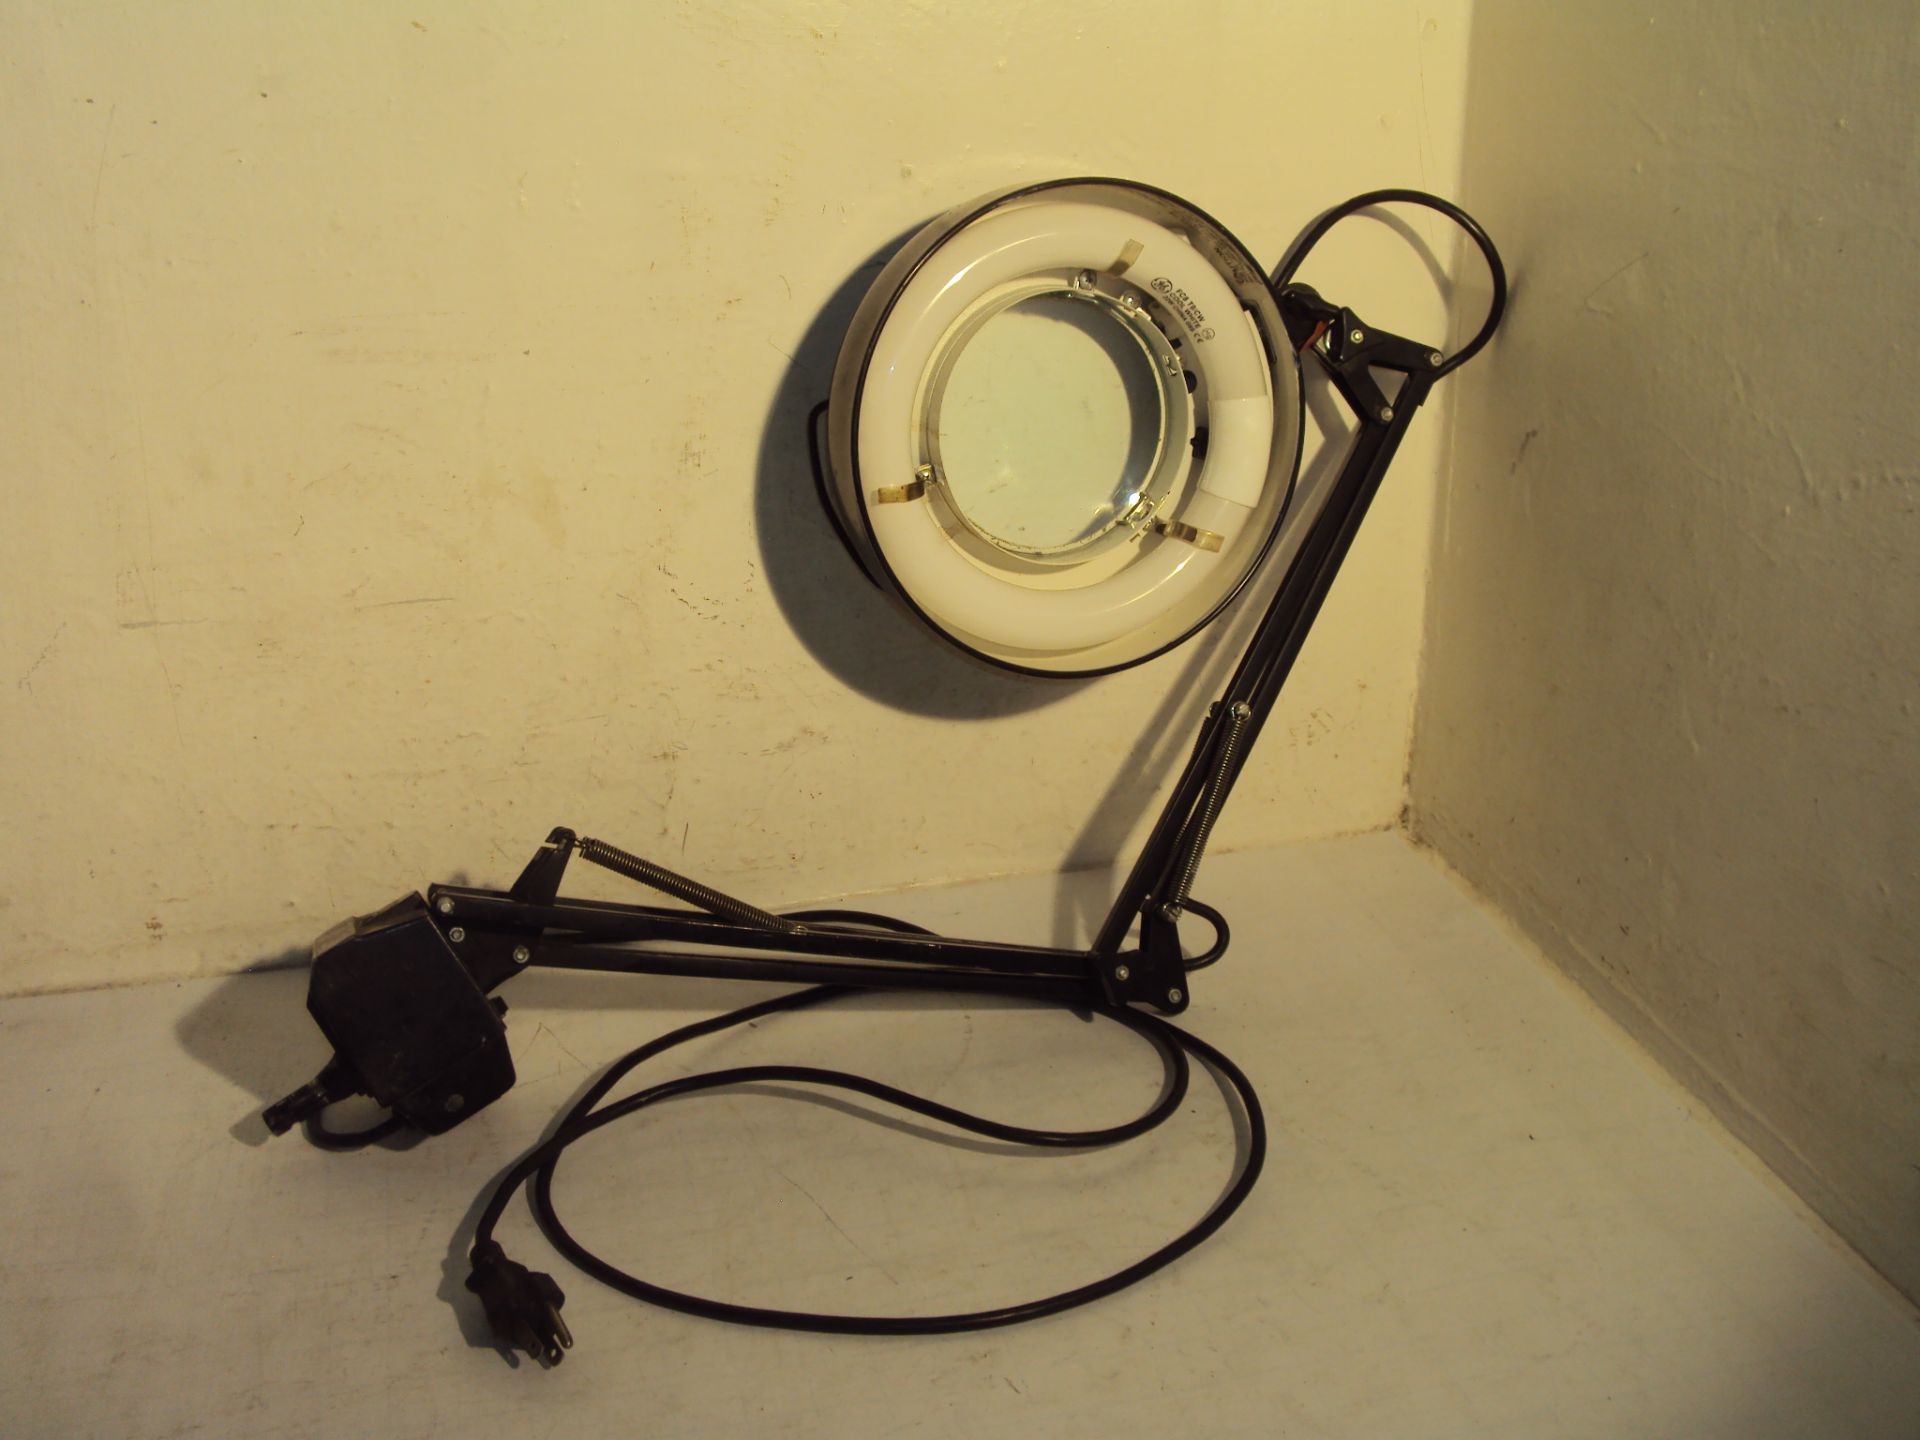 Articulating Arm Lighted Magnifier